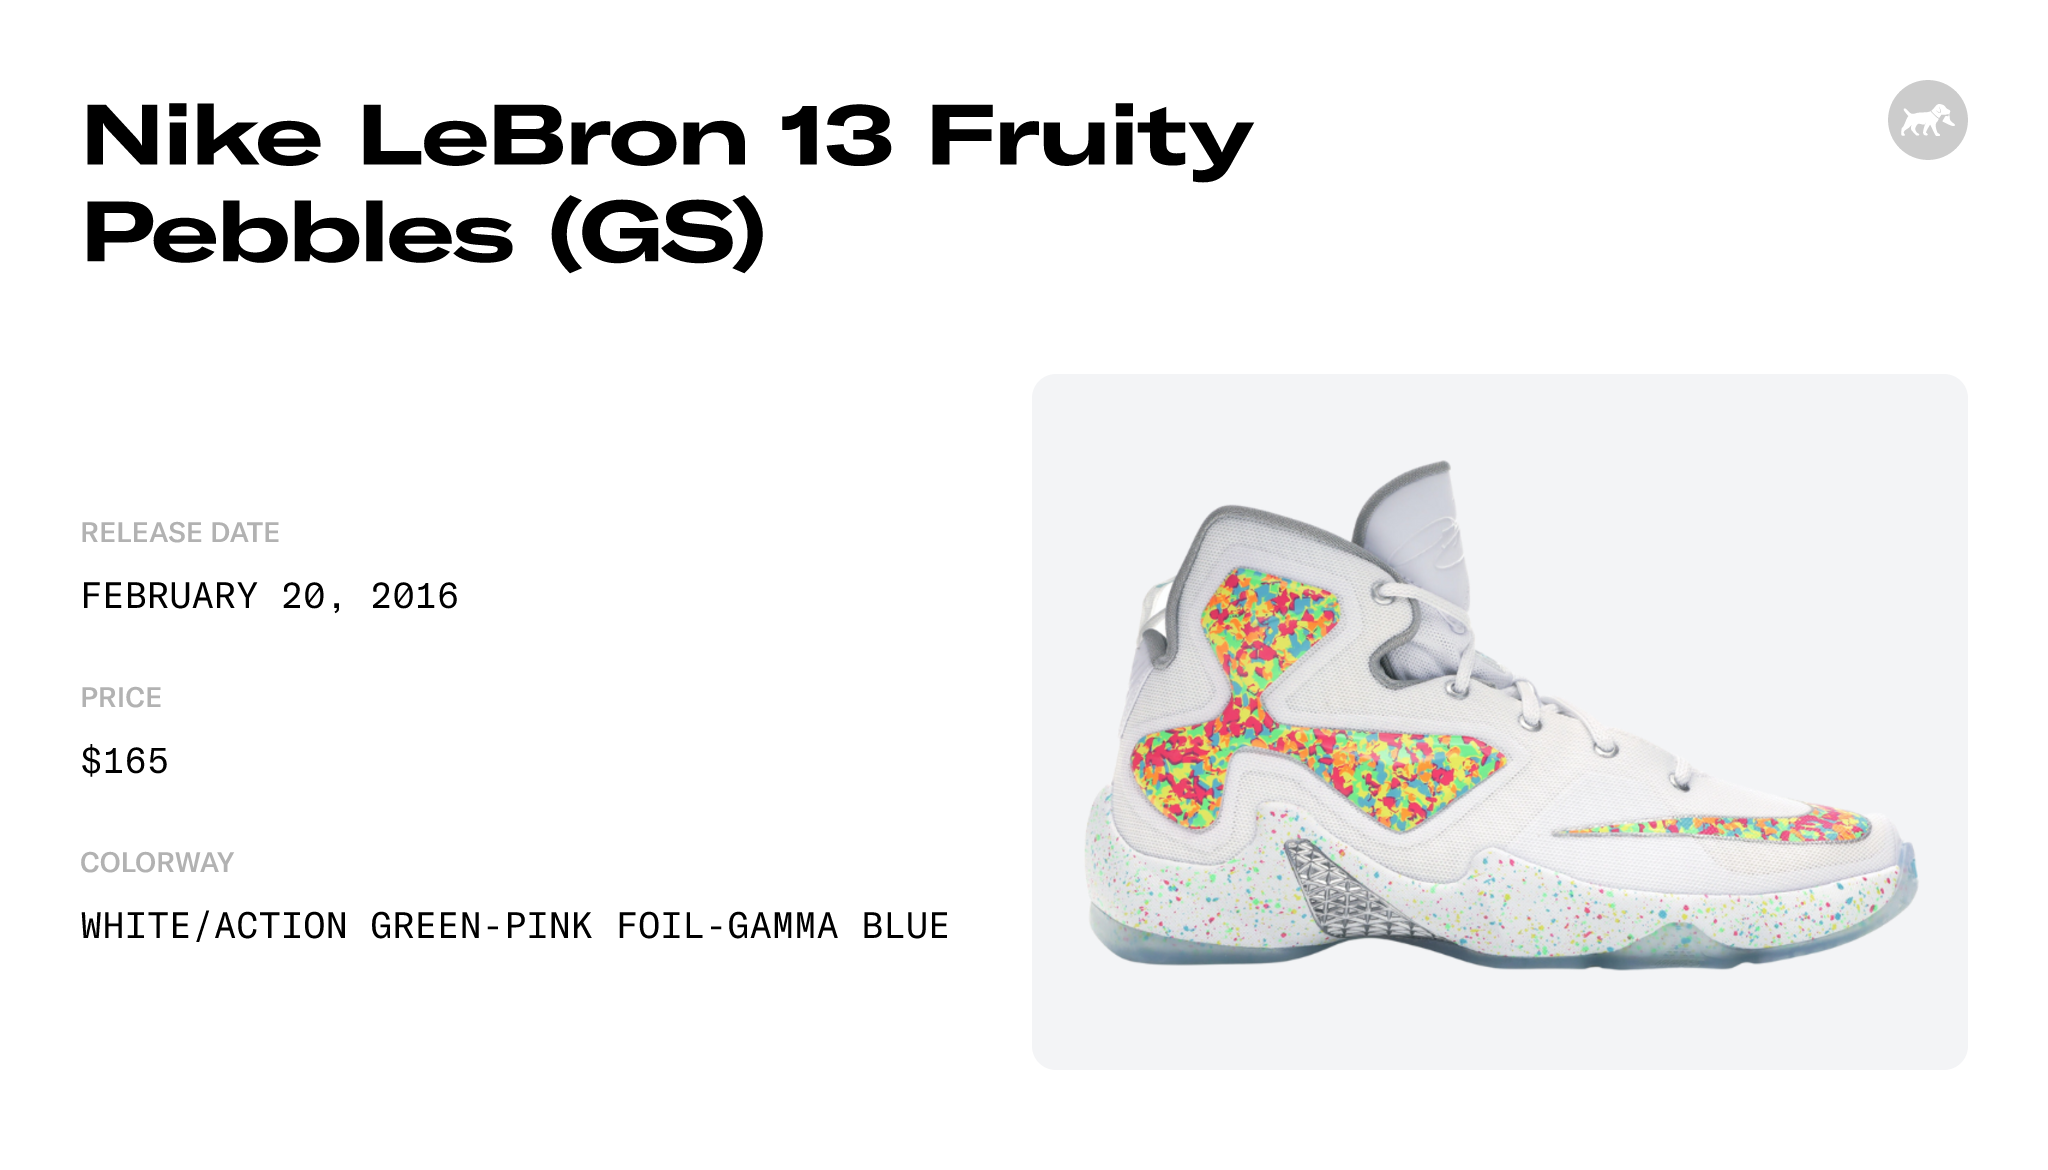 Nike LeBron 13 Fruity Pebbles (GS) - 846222-100 Raffles and Release Date